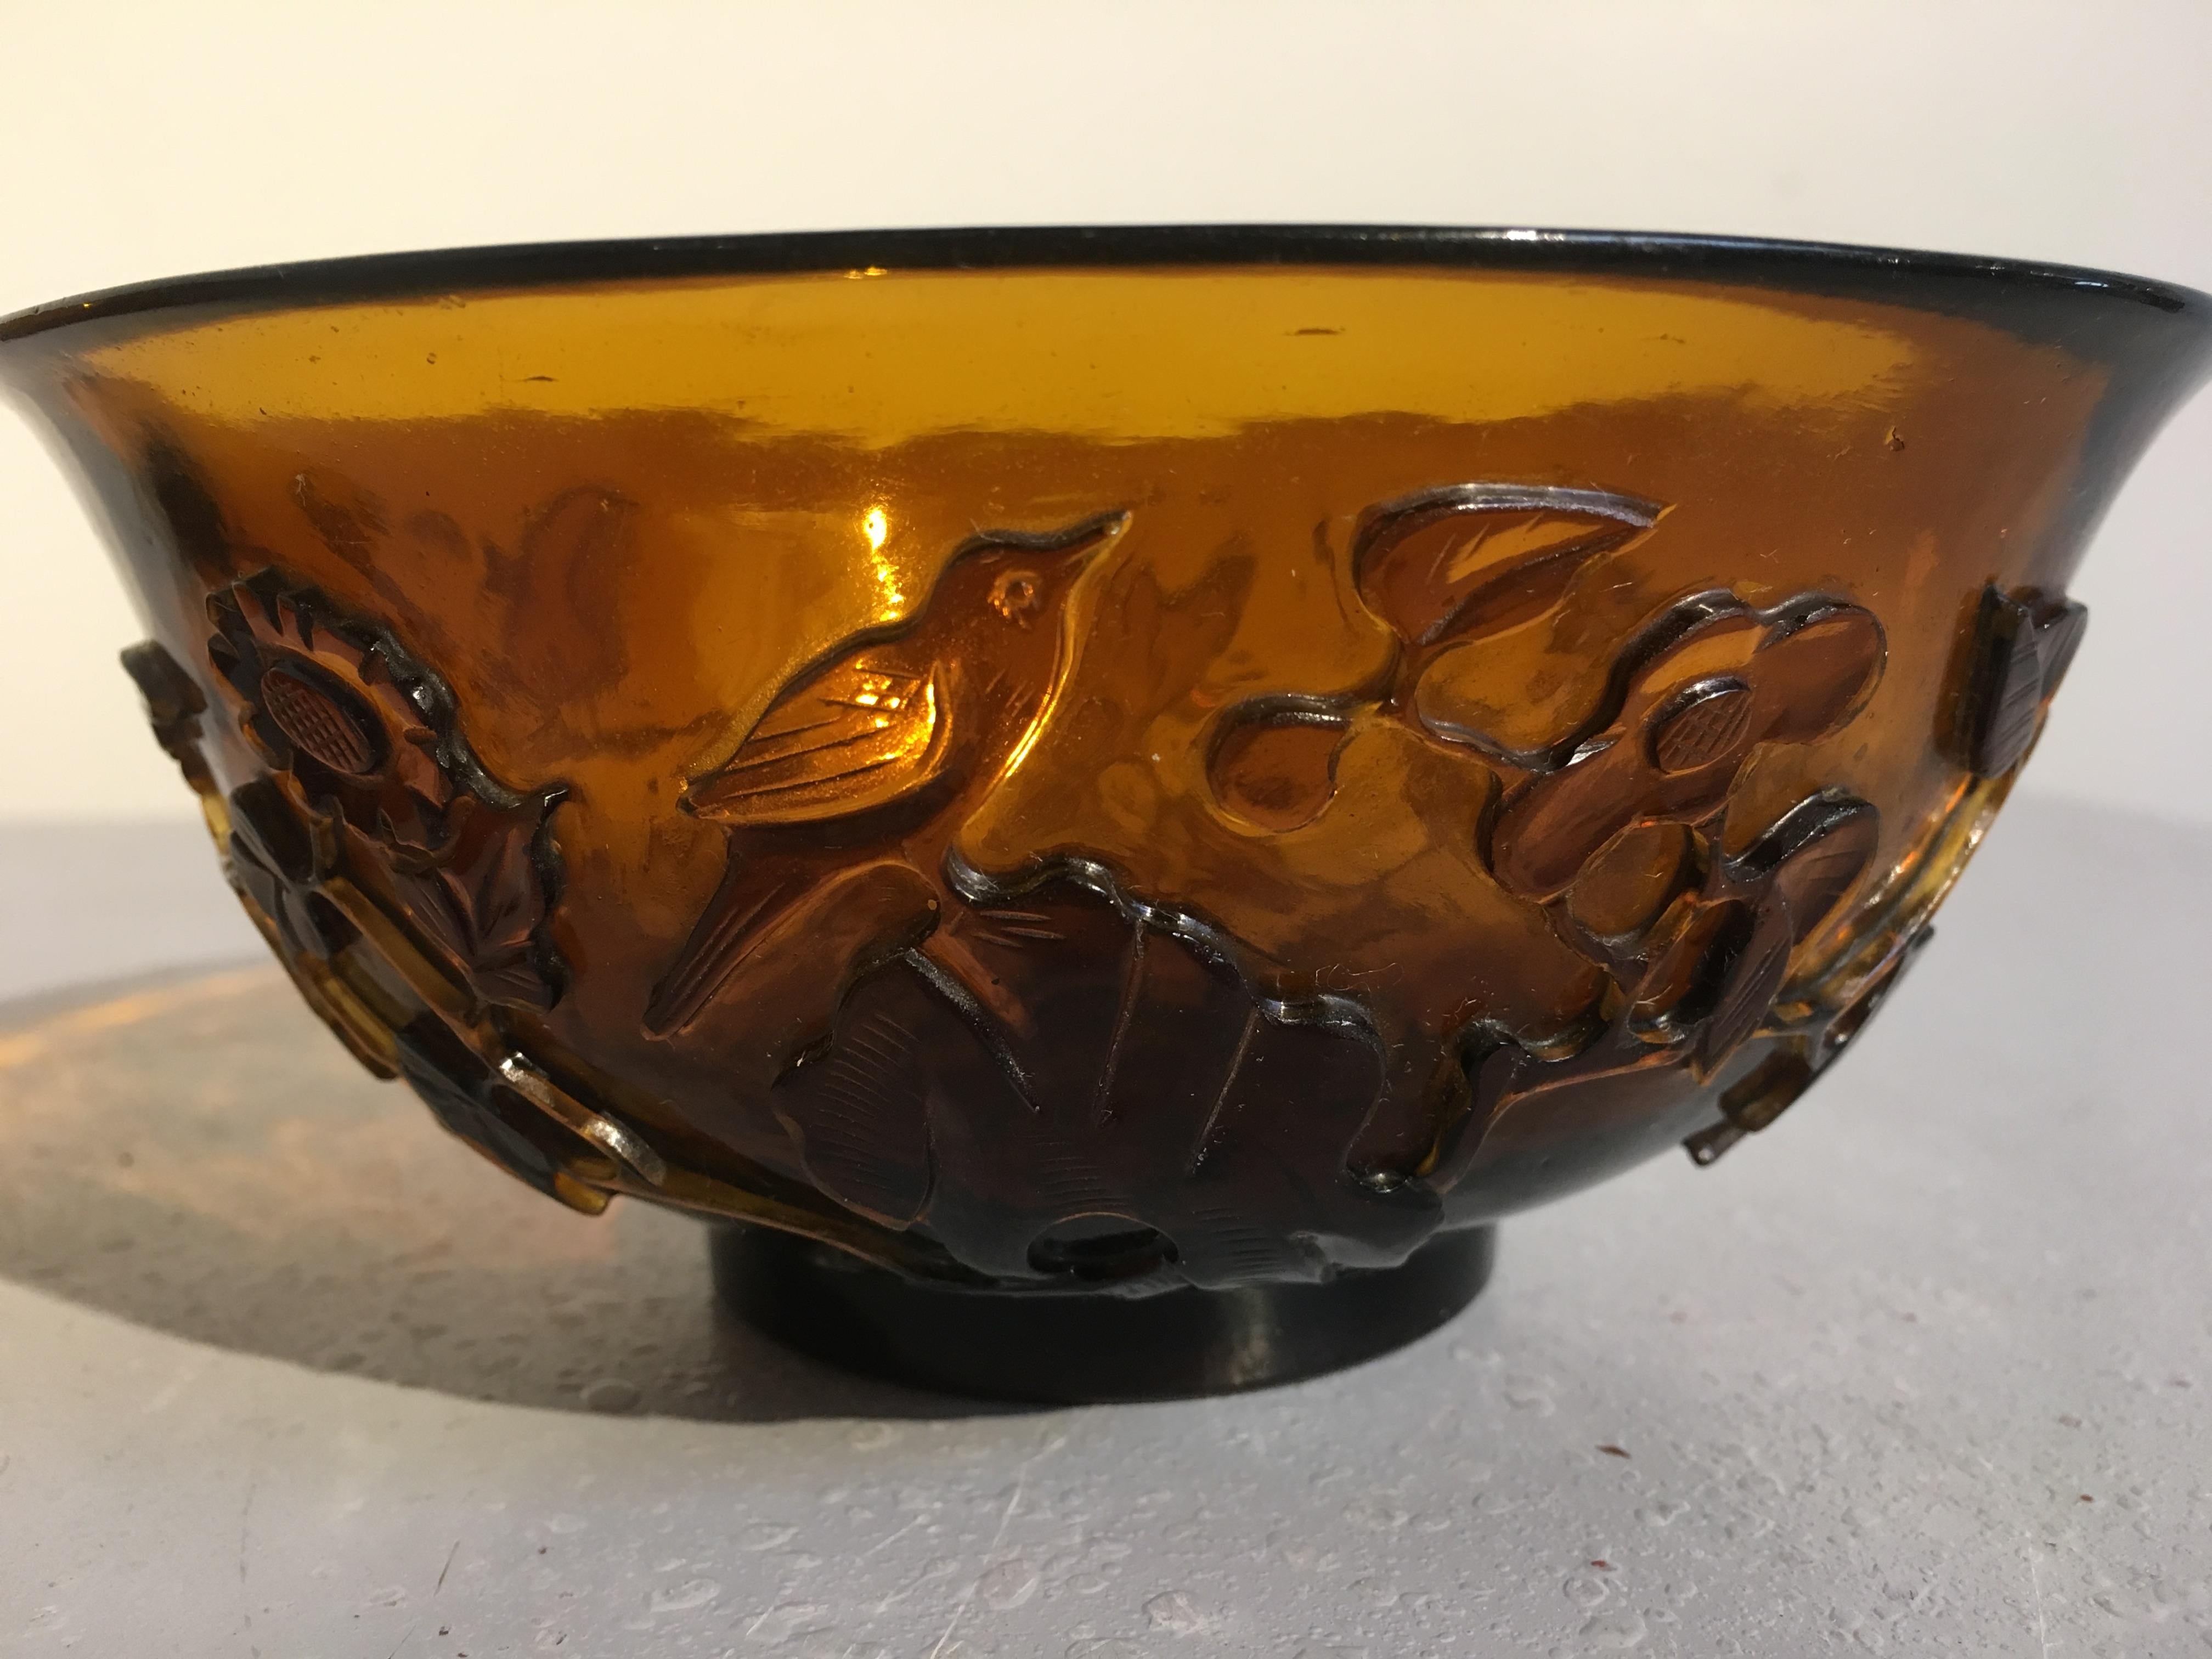 Pair of Chinese Amber Peking Glass Carved Bowls, Qing Dynasty, Late 19th Century For Sale 2